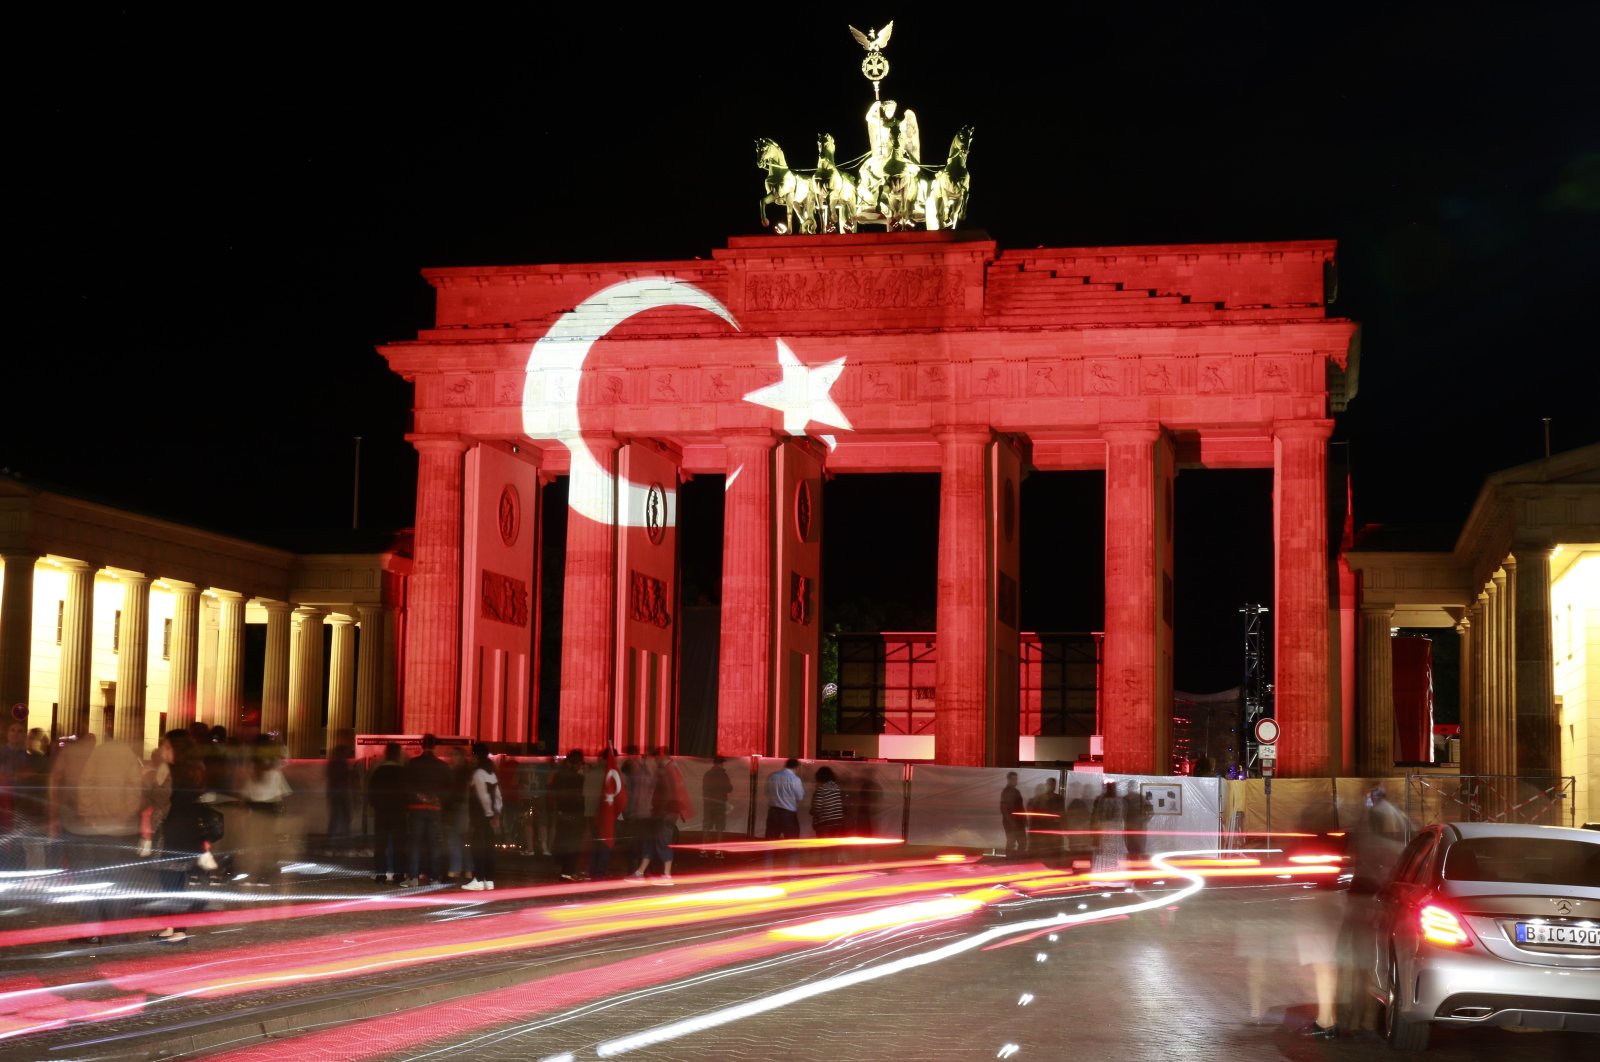 The "Brandenburger Tor" (Brandenburg Gate) is illuminated in the colors of the Turkish flag as a sign of solidarity after the terror attacks in Istanbul, Berlin, Germany, June 29, 2016. (Shutterstock Photo)